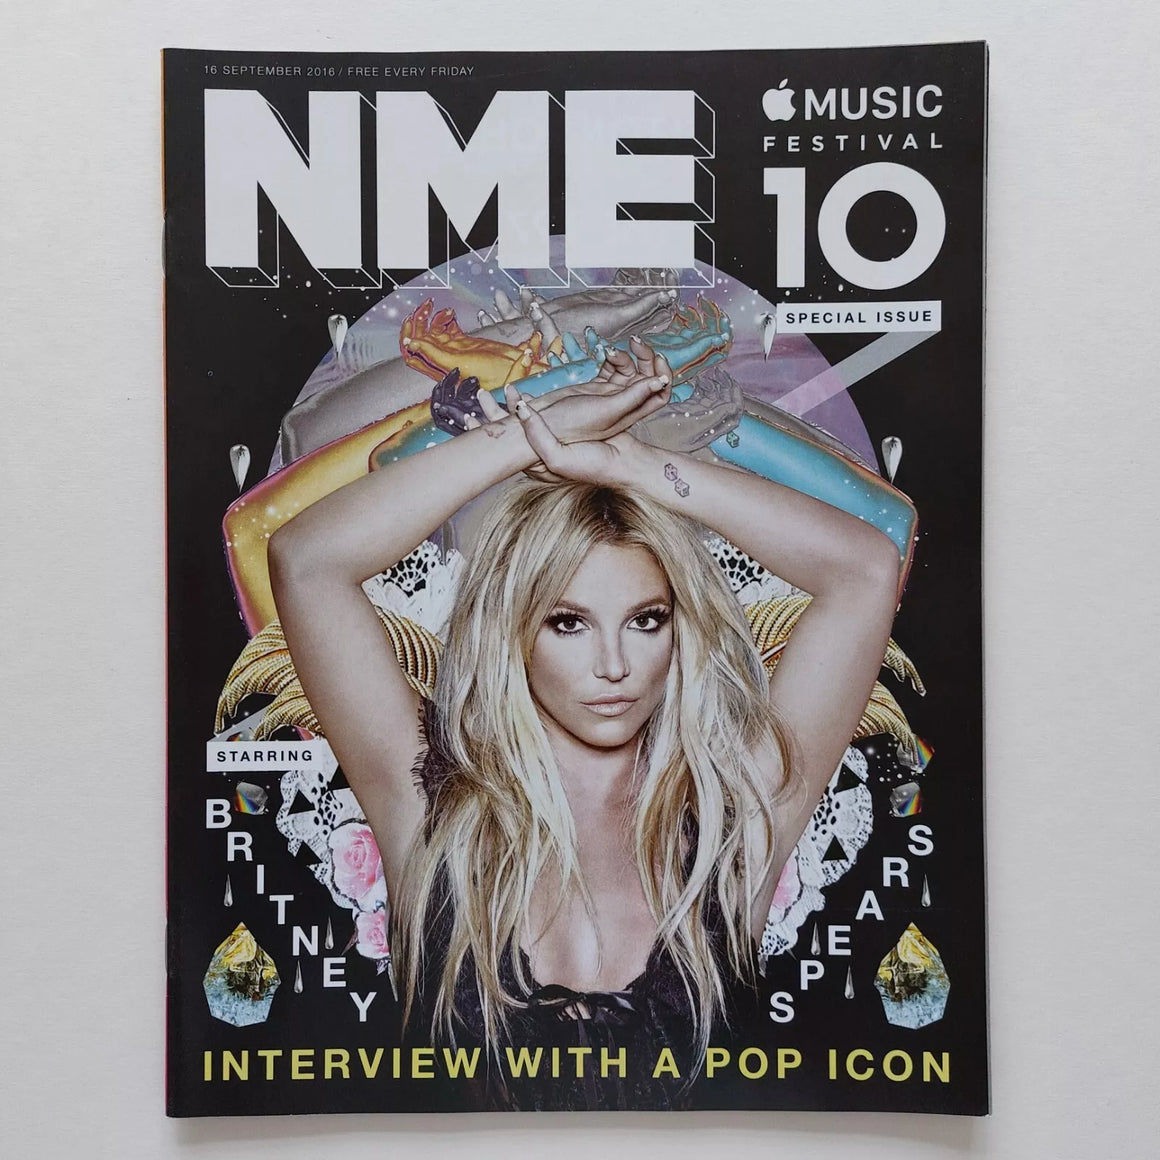 BRITNEY SPEARS - Interview With a Pop Icon UK NME MAGAZINE SEPTEMBER 2016